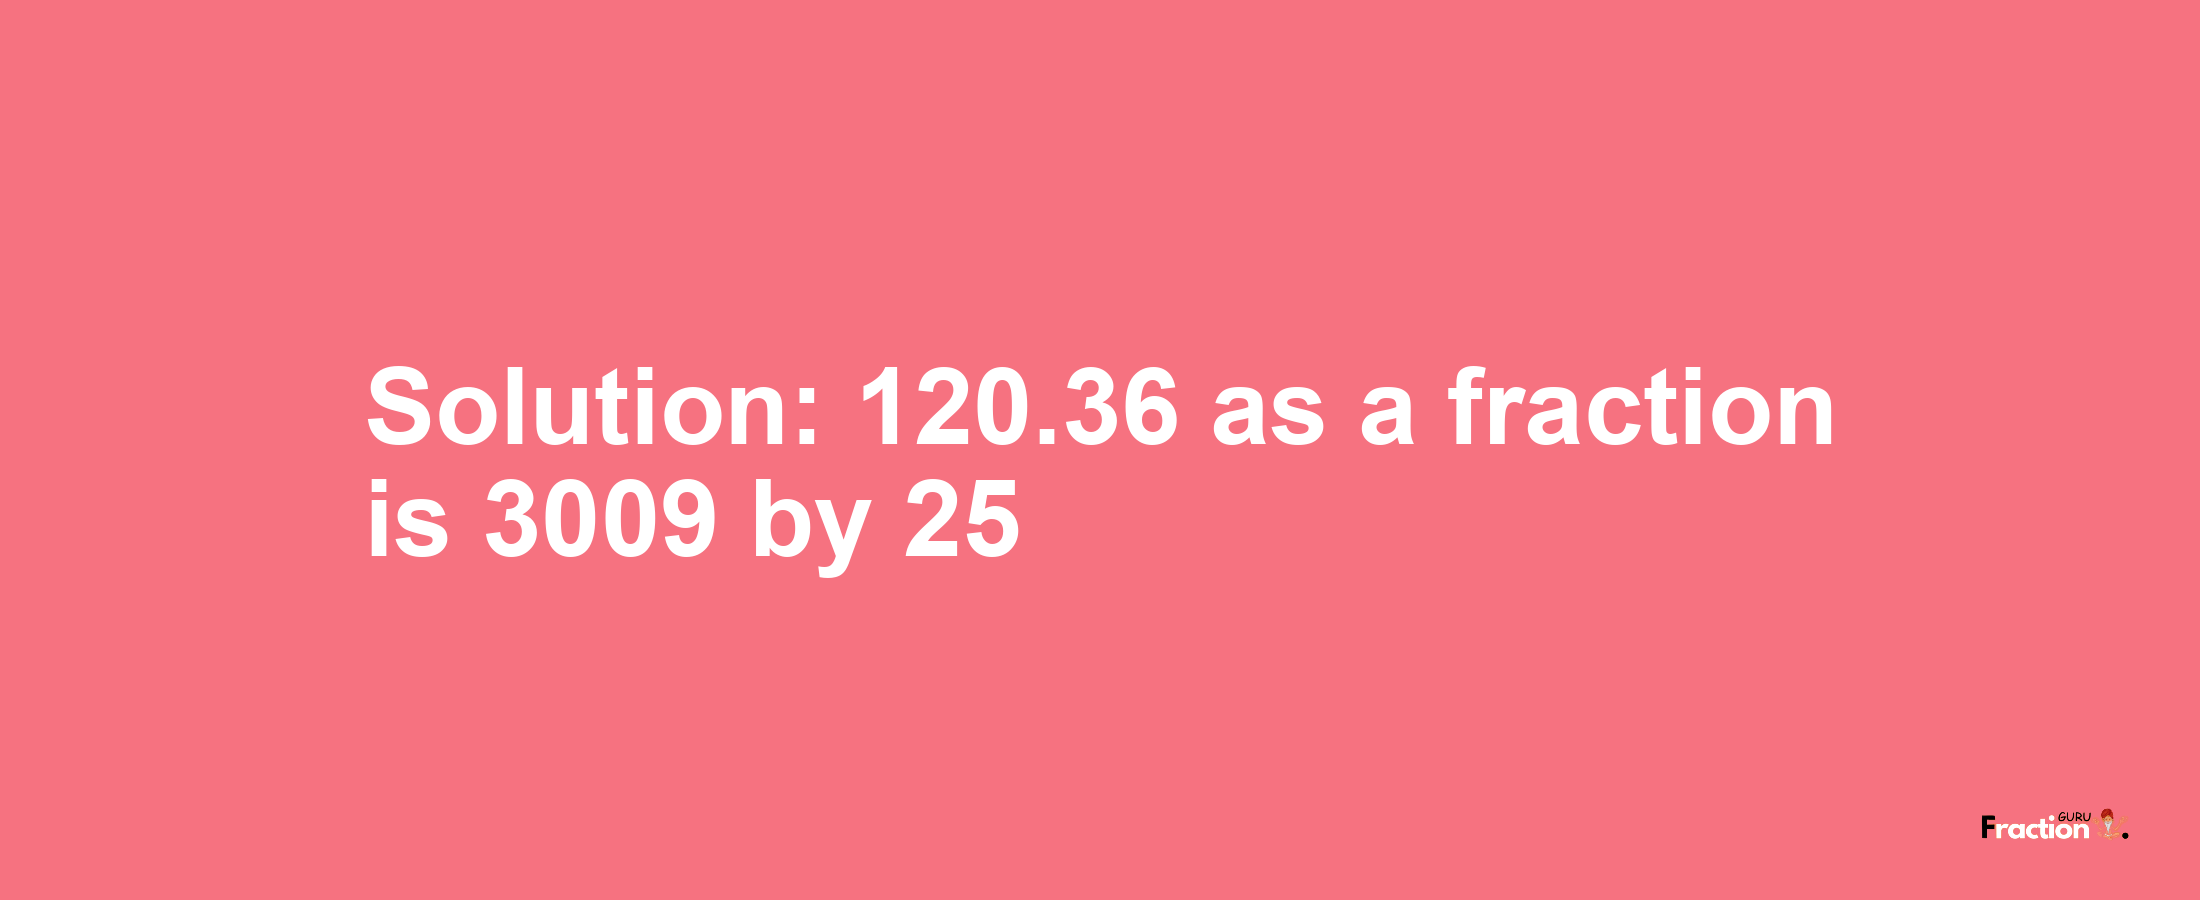 Solution:120.36 as a fraction is 3009/25